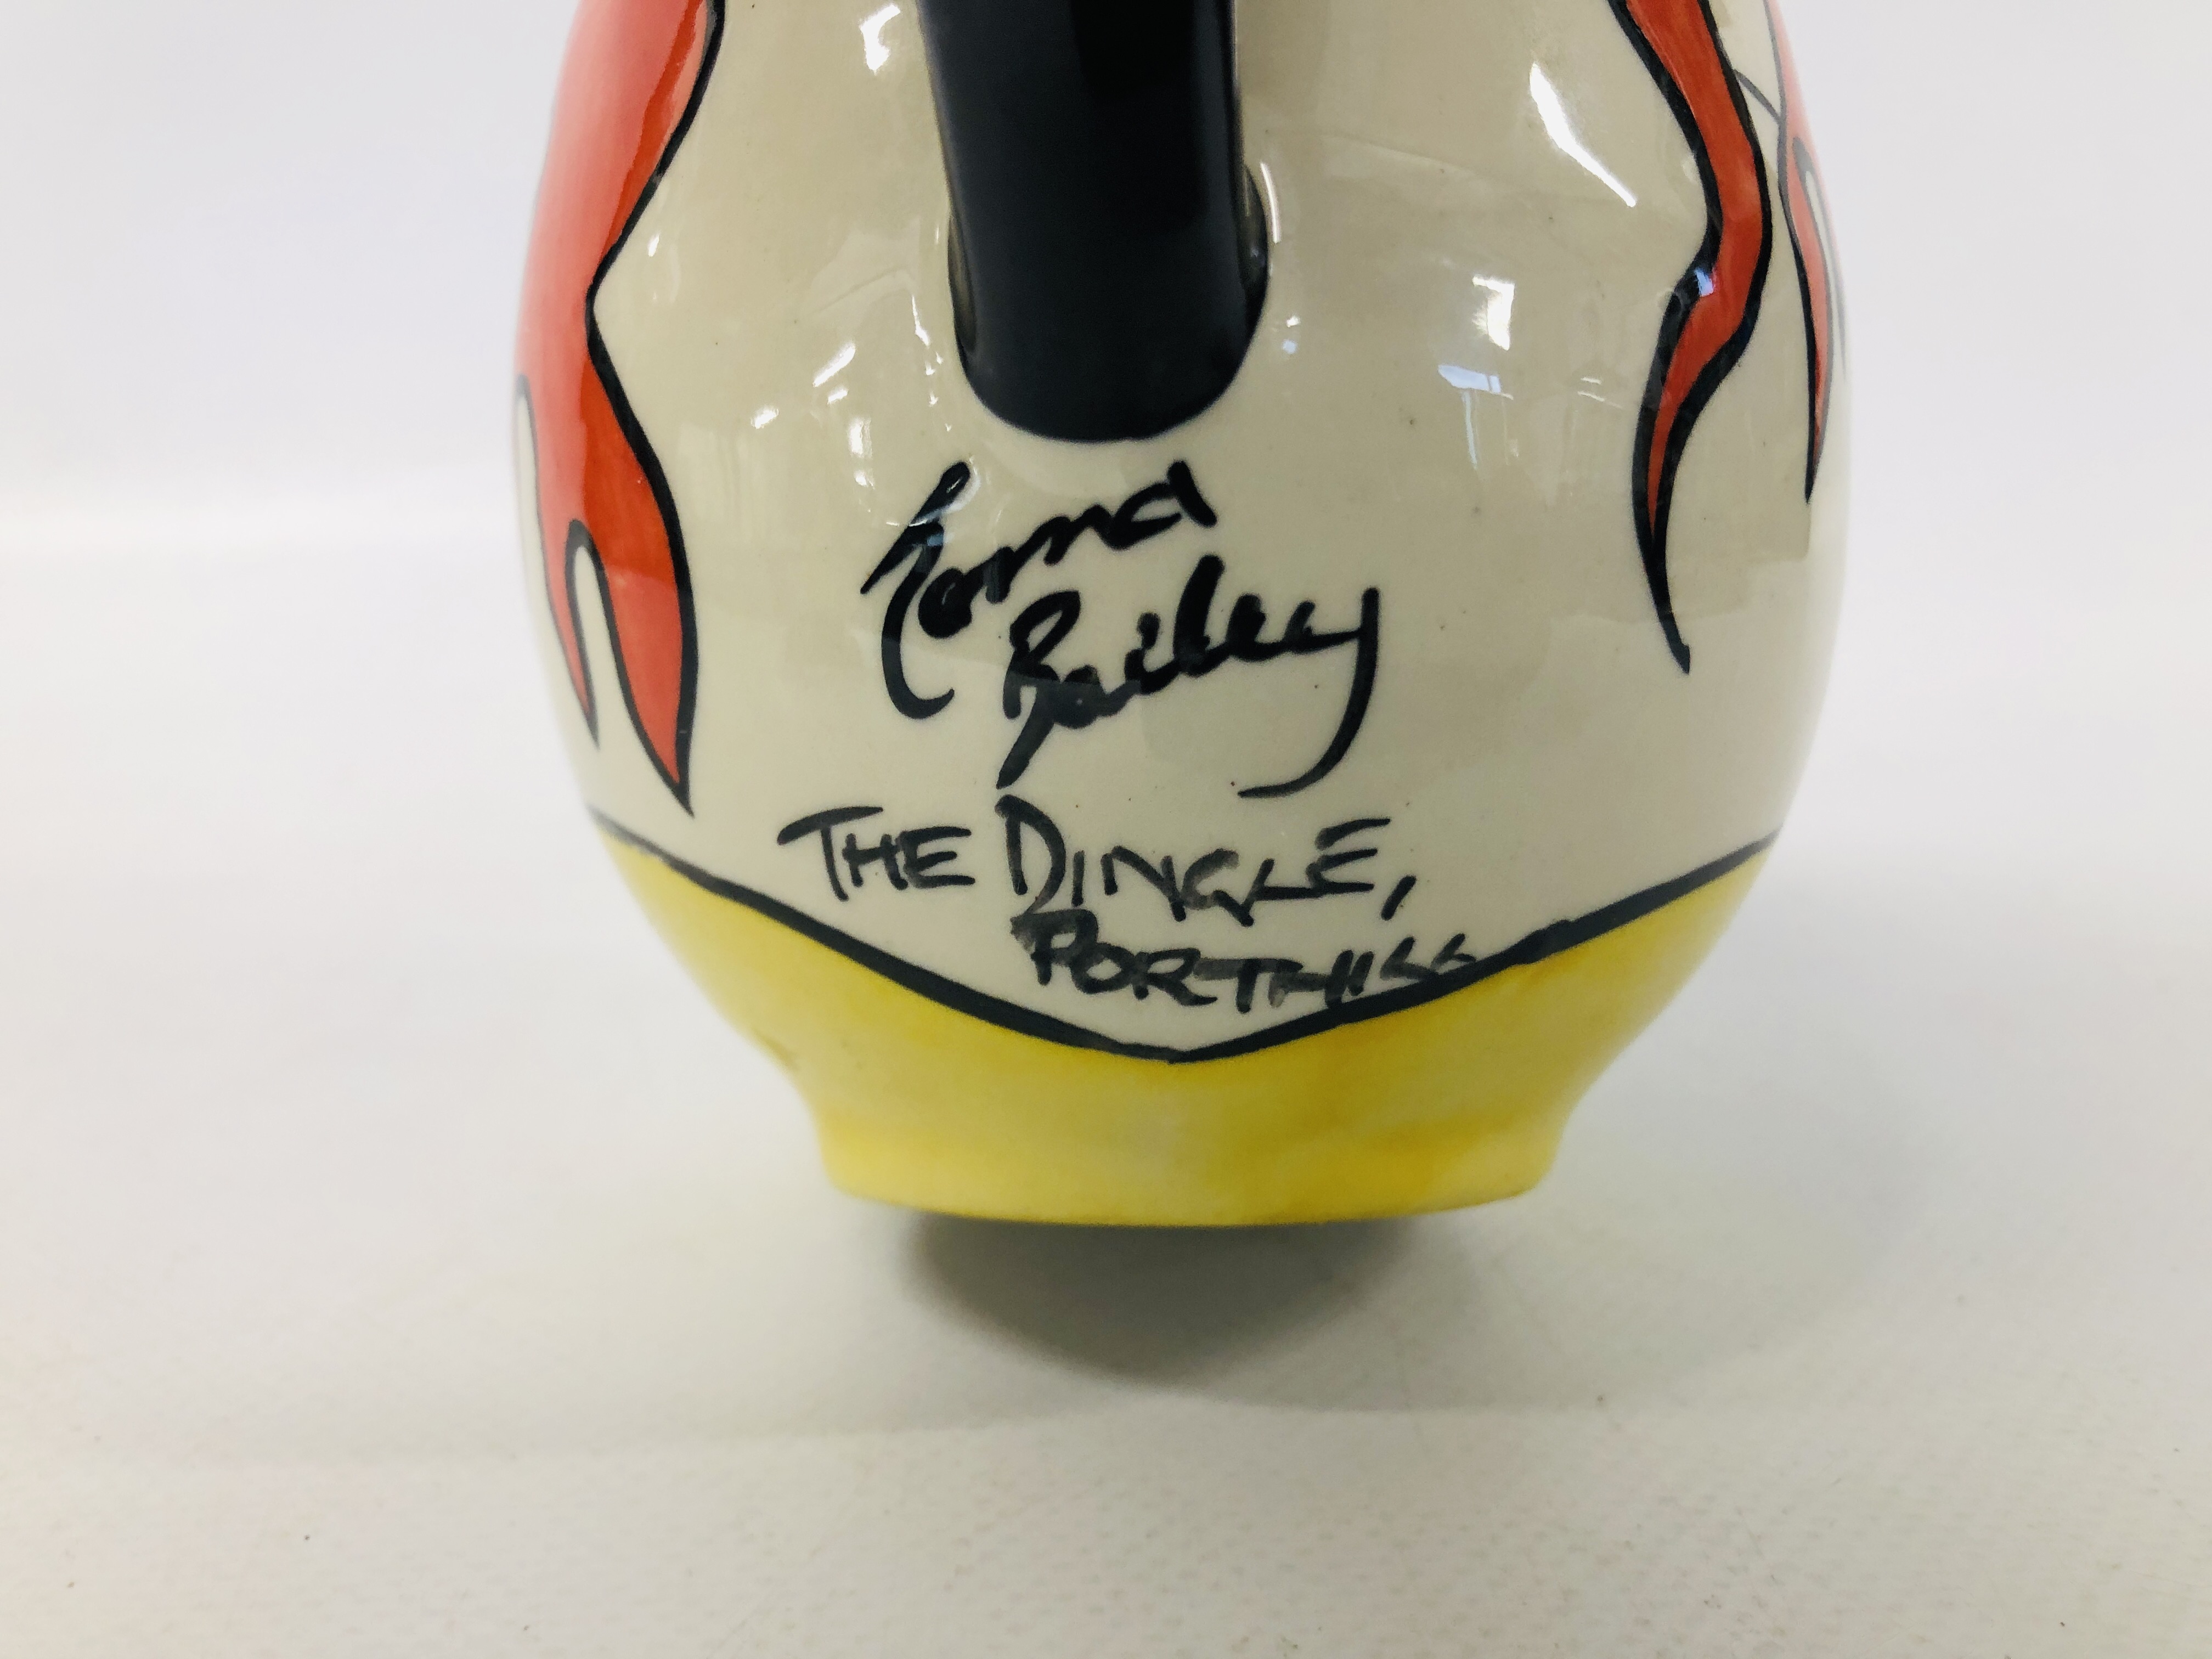 "THE DINGLE" OLD ELLGRRAVE POTTERY MILK JUG SIGNED BY LORNA BAILEY, H 13CM. - Image 3 of 4